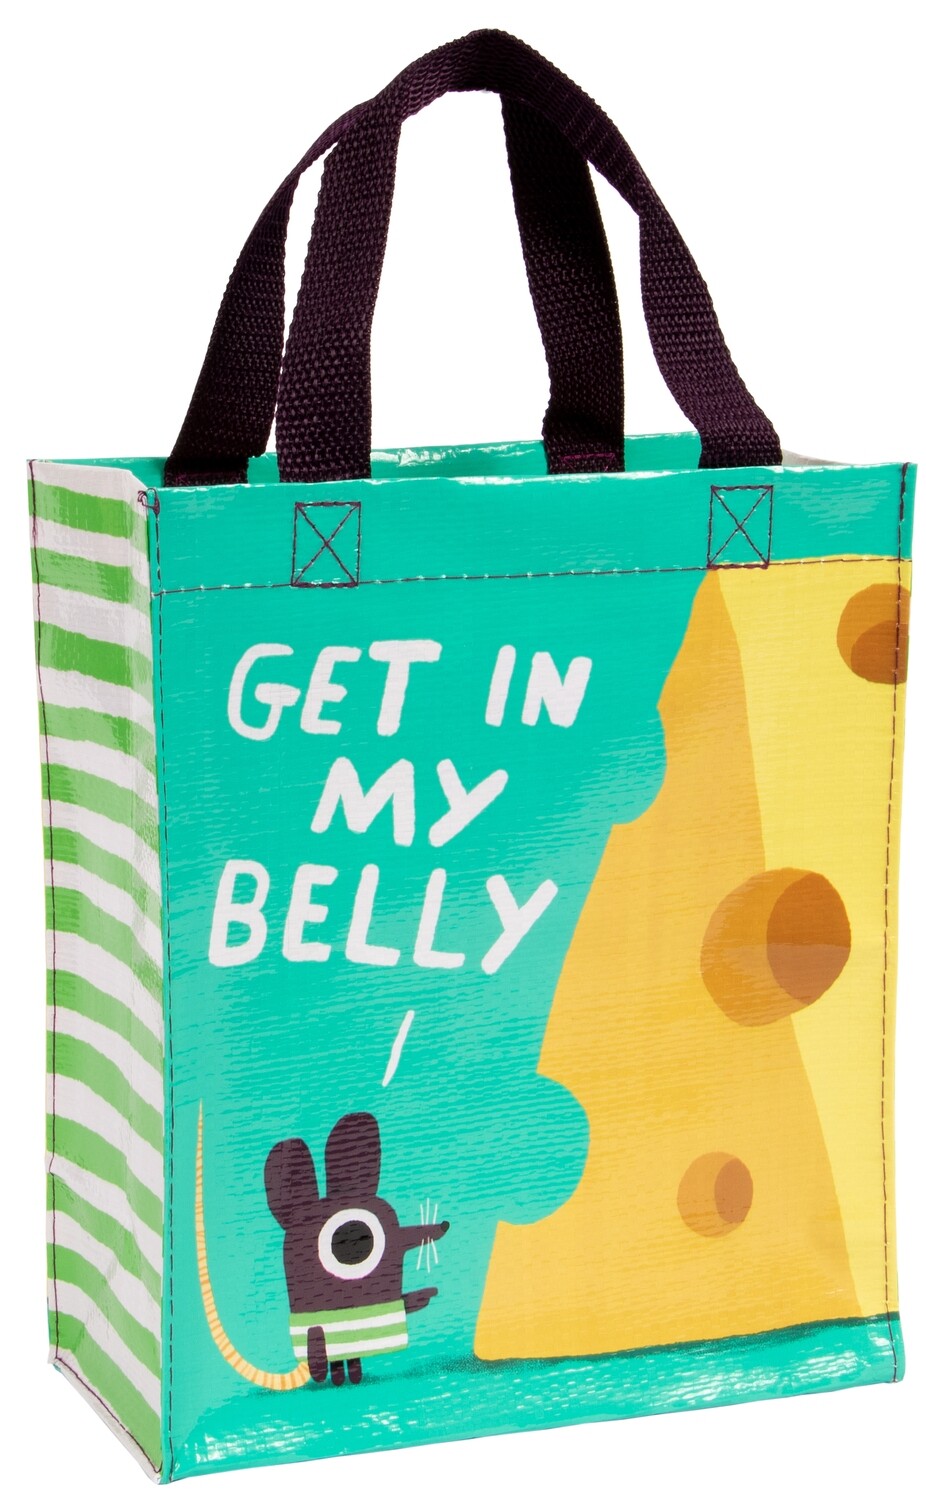 Get In My Belly handy tote